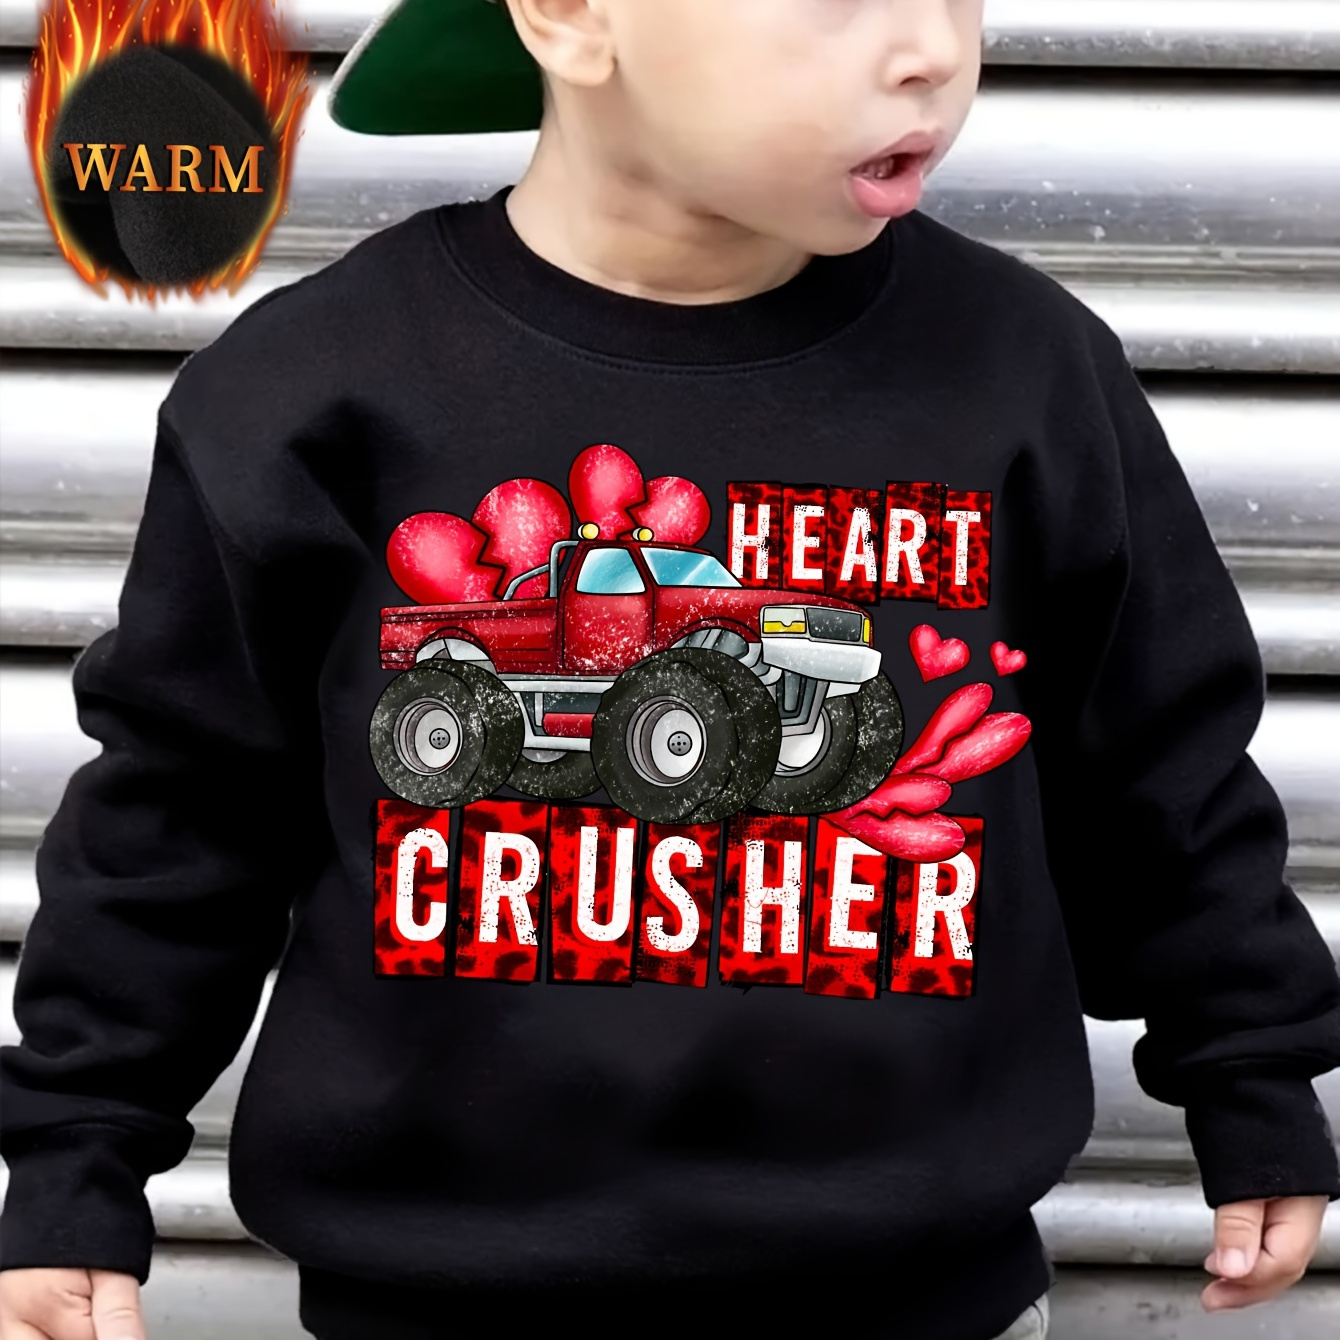 

Valentine's Day Cartoon Truck And Heart Crusher Letter Graphic Print Boys Warm Fleece Sweatshirt: Thick And Cozy Top For Spring Fall Winter Season